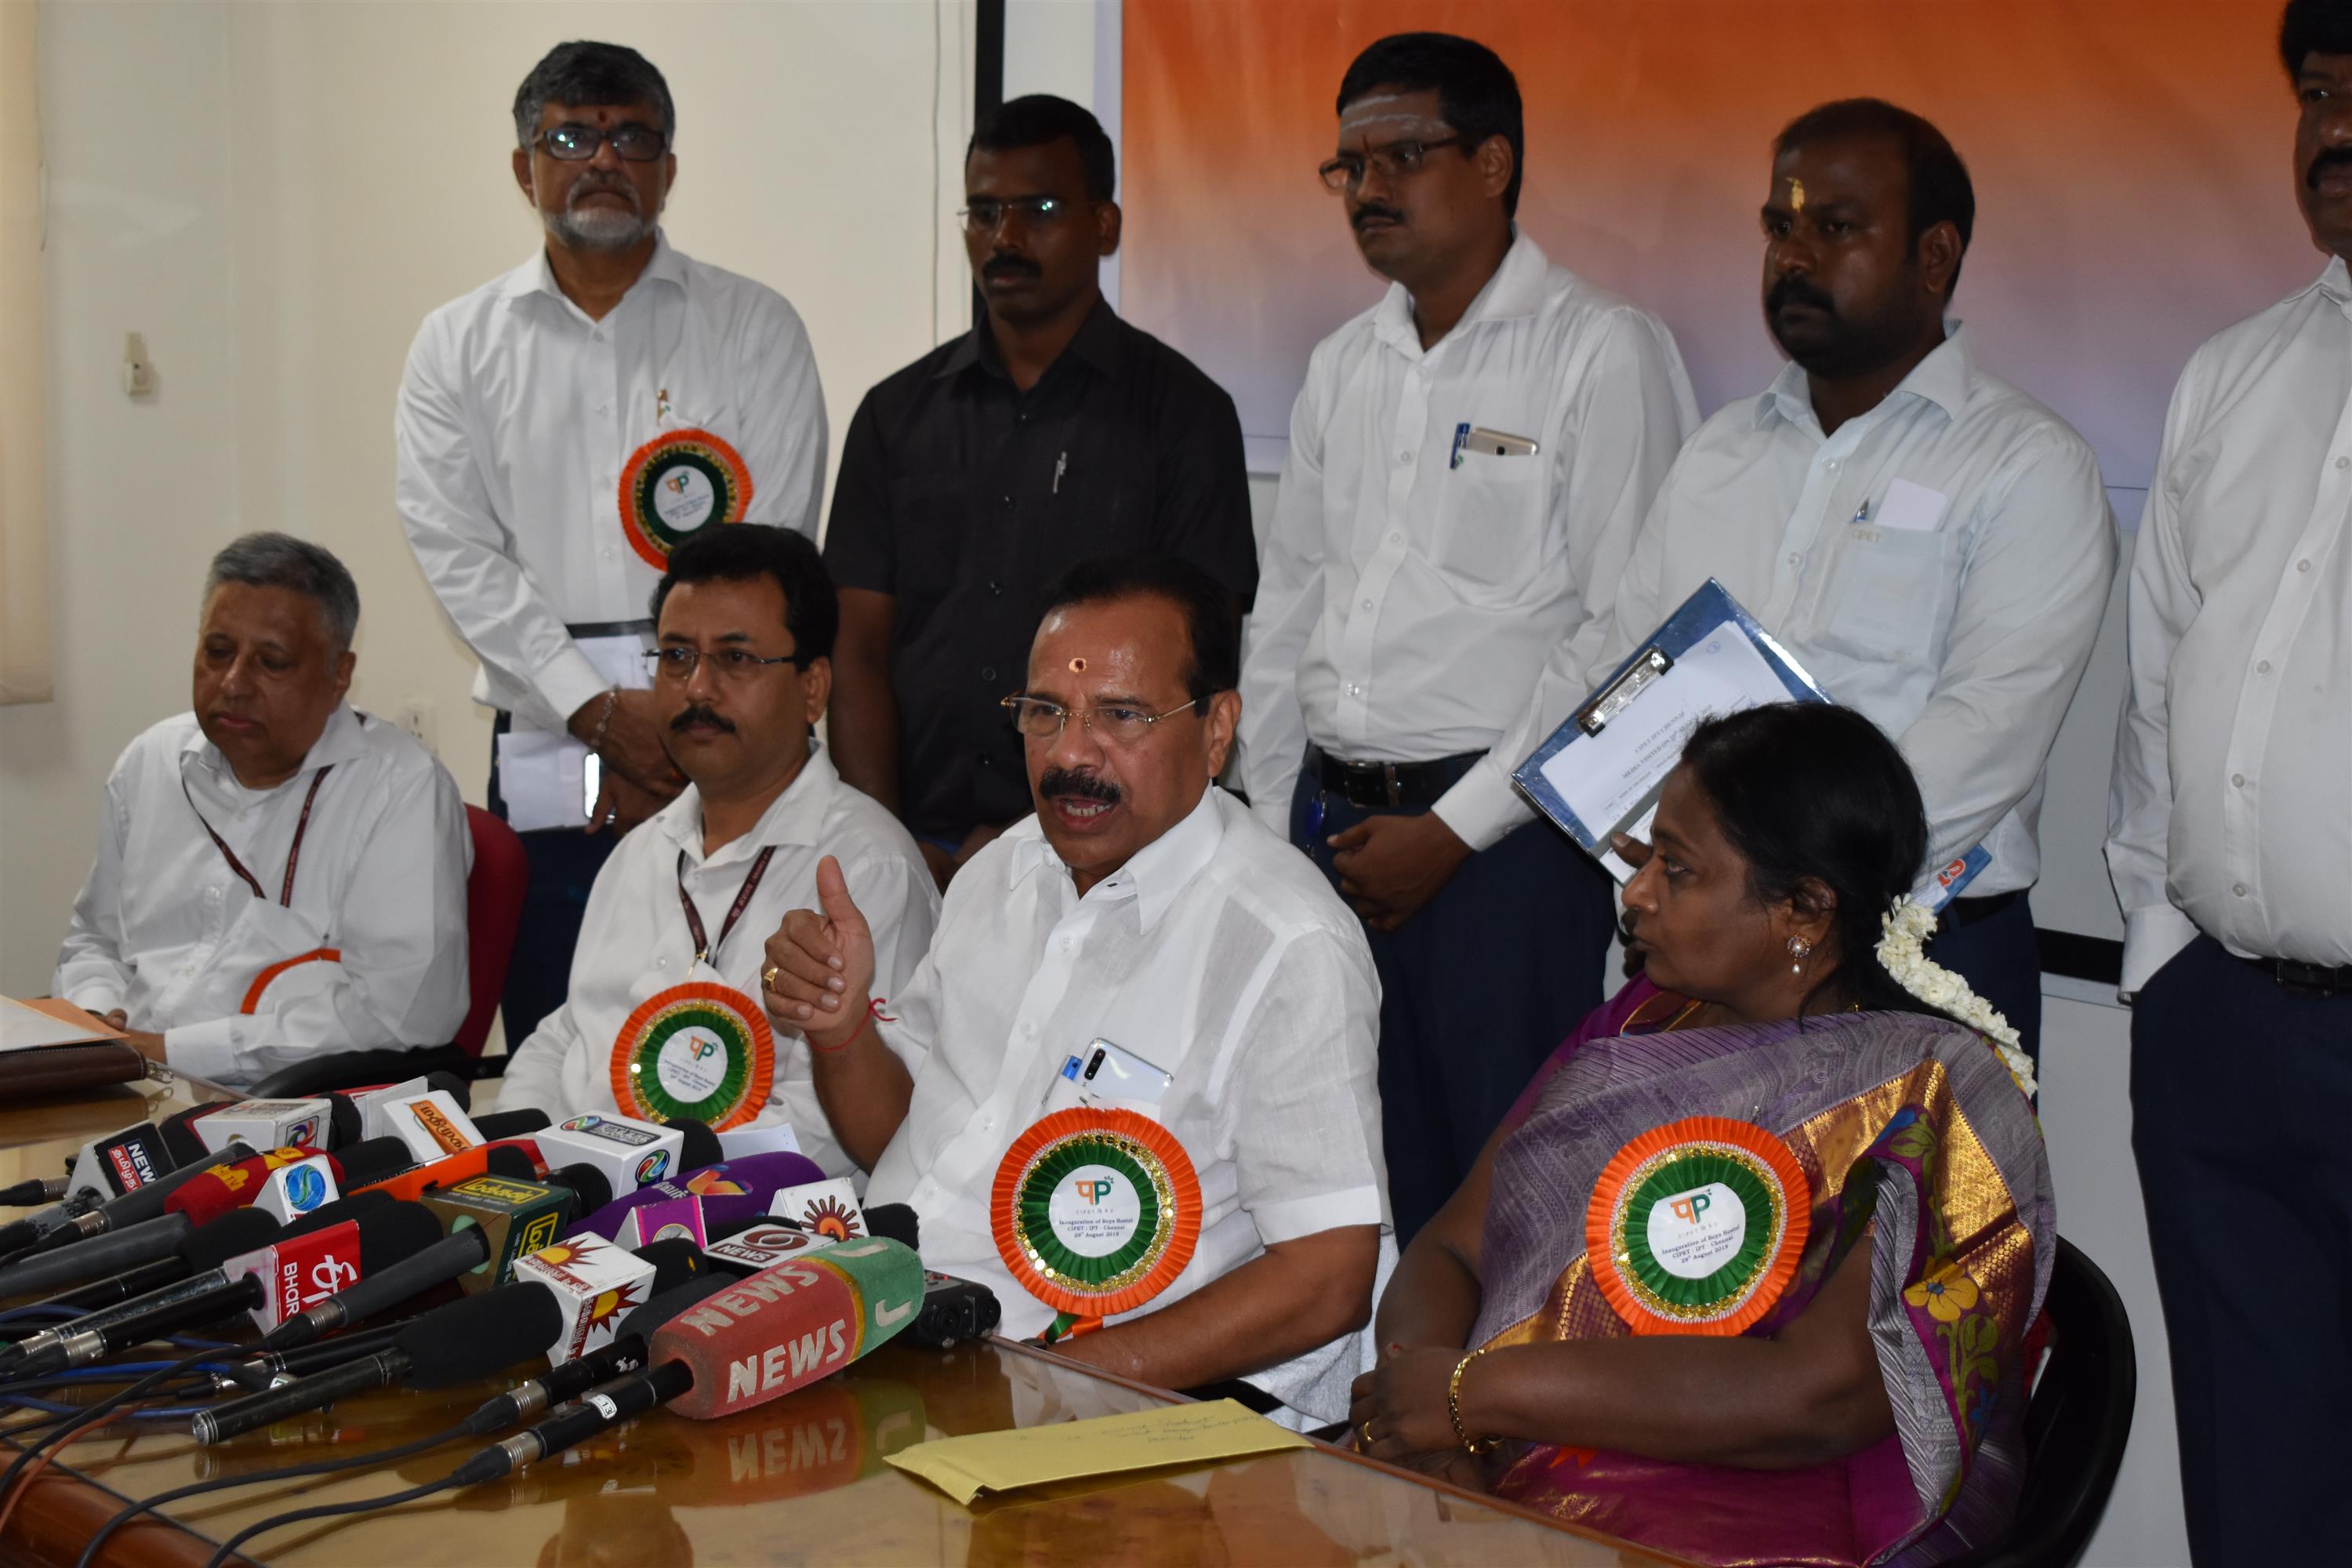 8.	Shri. D. V. Sadananda Gowda, Union Minister for Chemicals & Fertilizers addressing the media on the sideline of the inauguration of the Boys Hostel of the CIPET: Institute of Plastics Technology, Deptt. Of Chemicals & Petrochemicals, Ministry of Chemicals & Fertilizers at Chennai, today (August 29, 2019)  